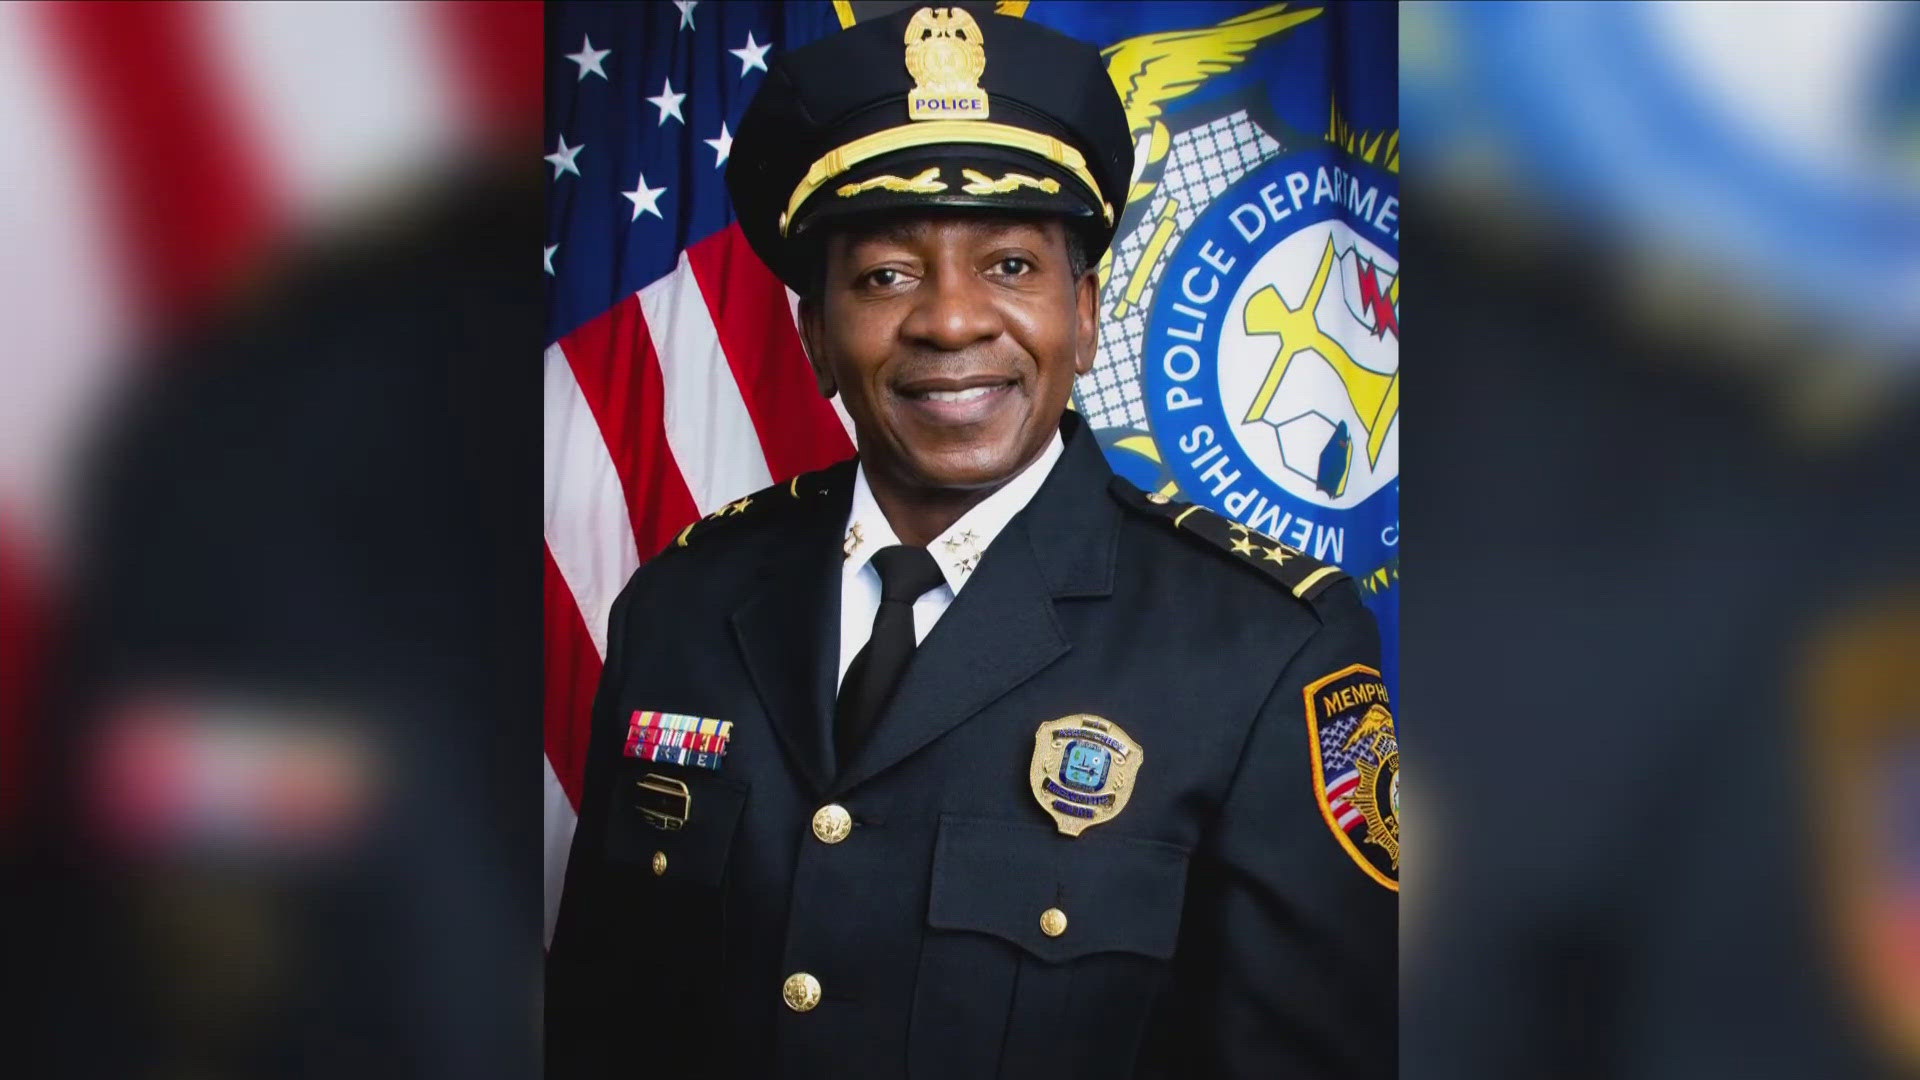 There has been fallout after news broke out that the Memphis Police Department's second-in-command lives in Georgia.